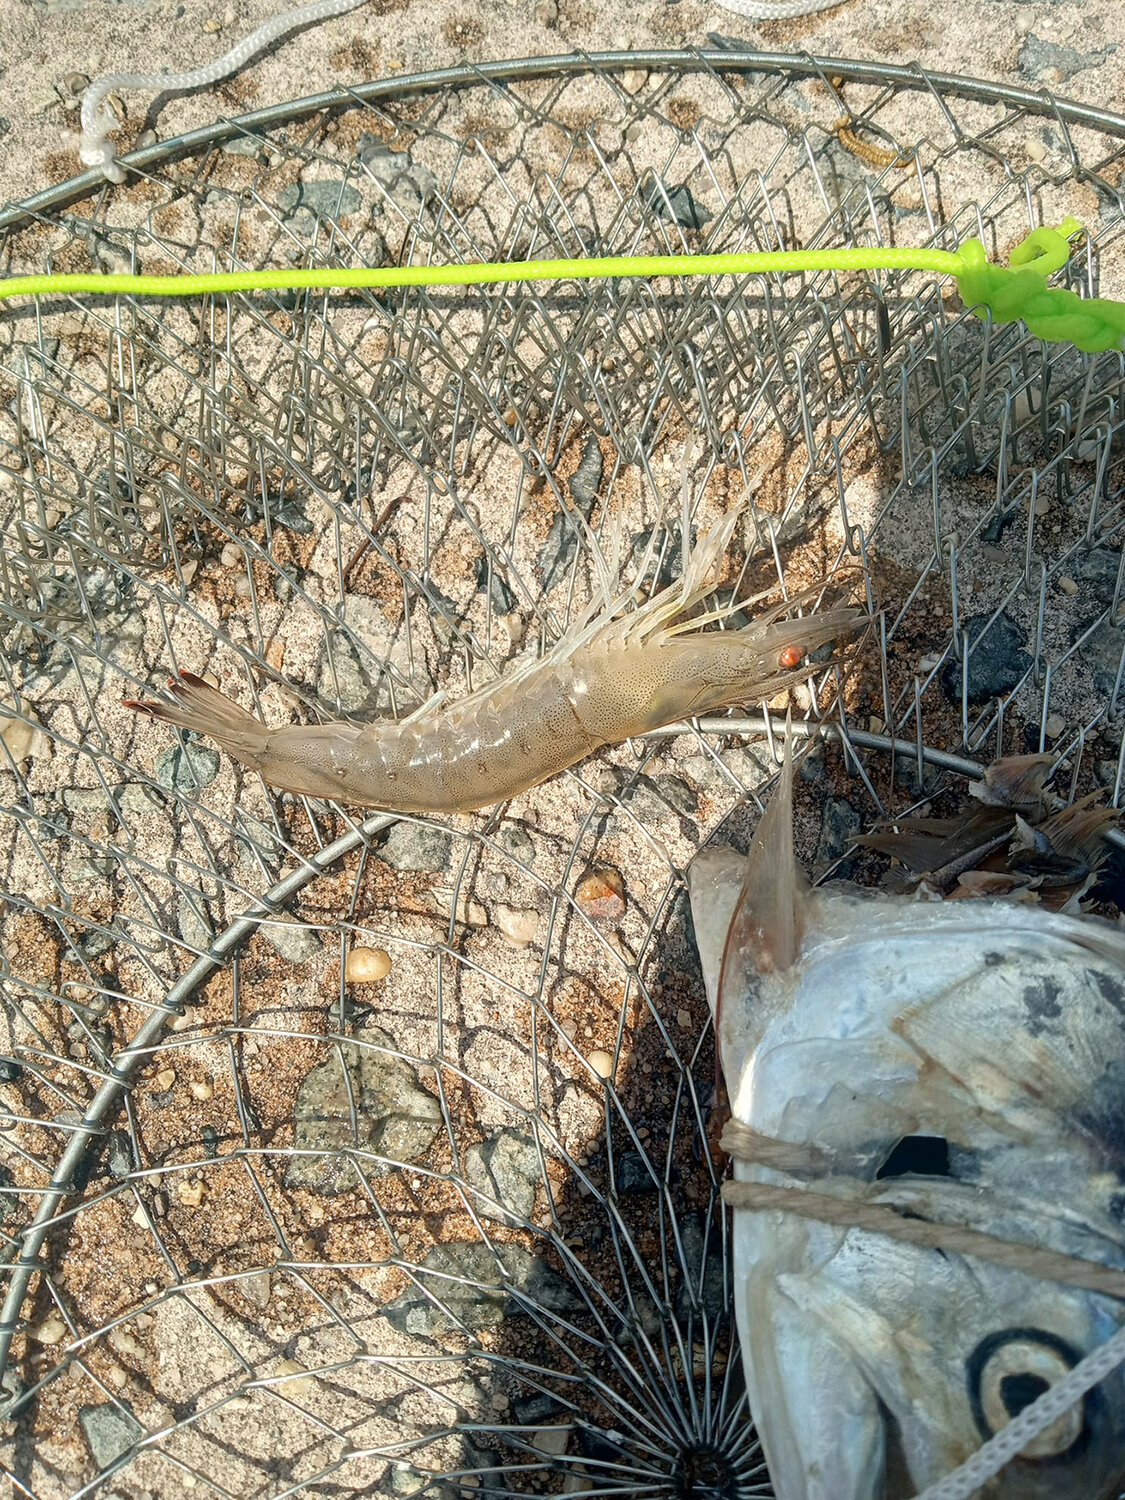 This Atlantic white shrimp was caught in a crab trap in Love Creek by Matt Ryan and his kids.